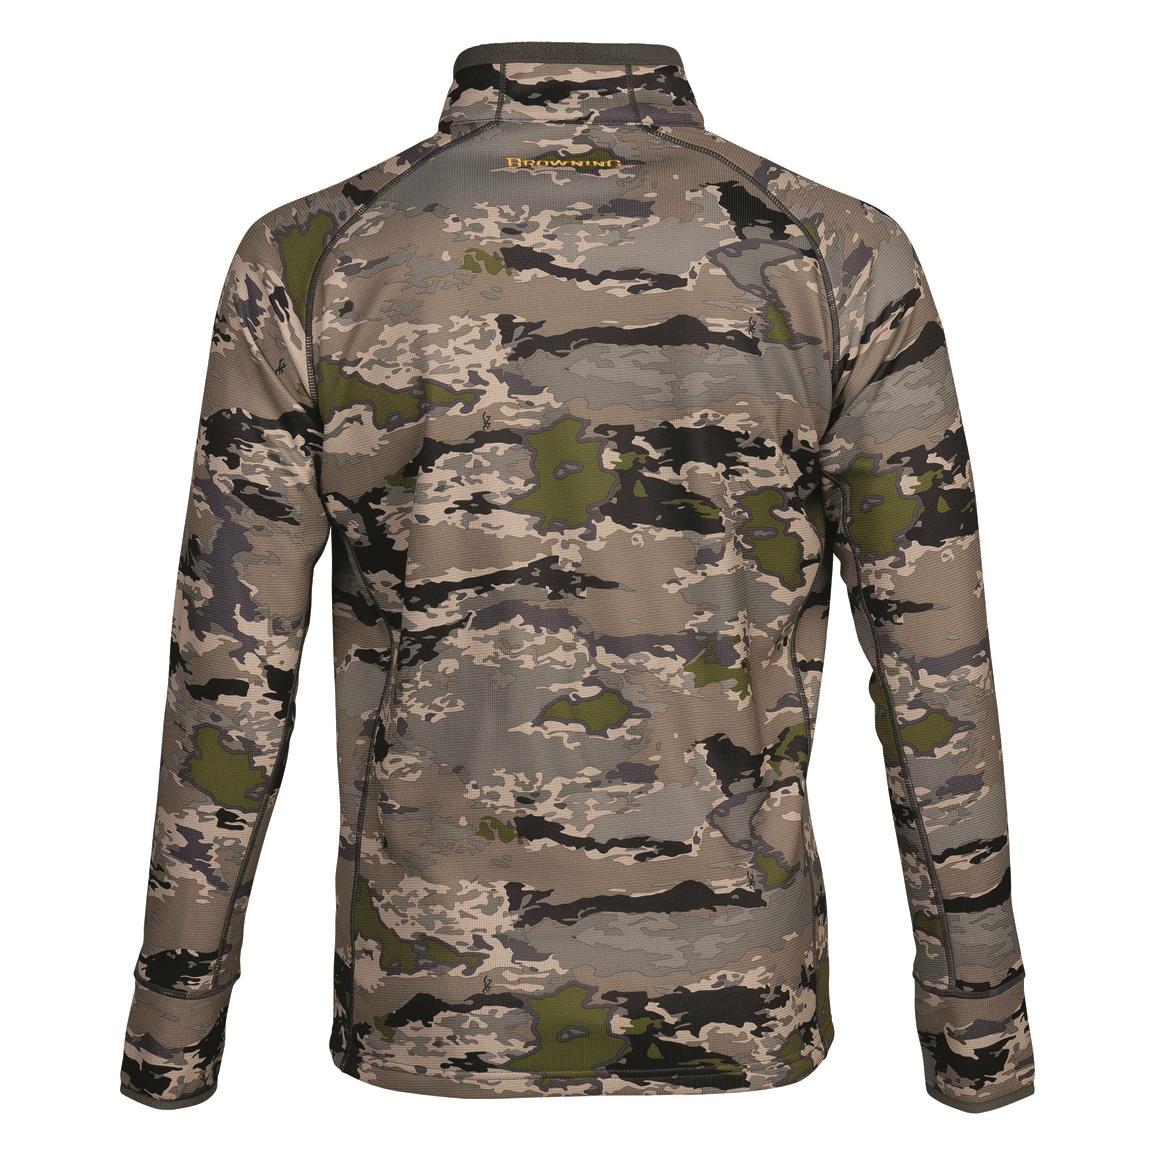 Guide Gear Steadfast 4-in-1 Hunting Parka, 150 Gram Thinsulate Platinum ...